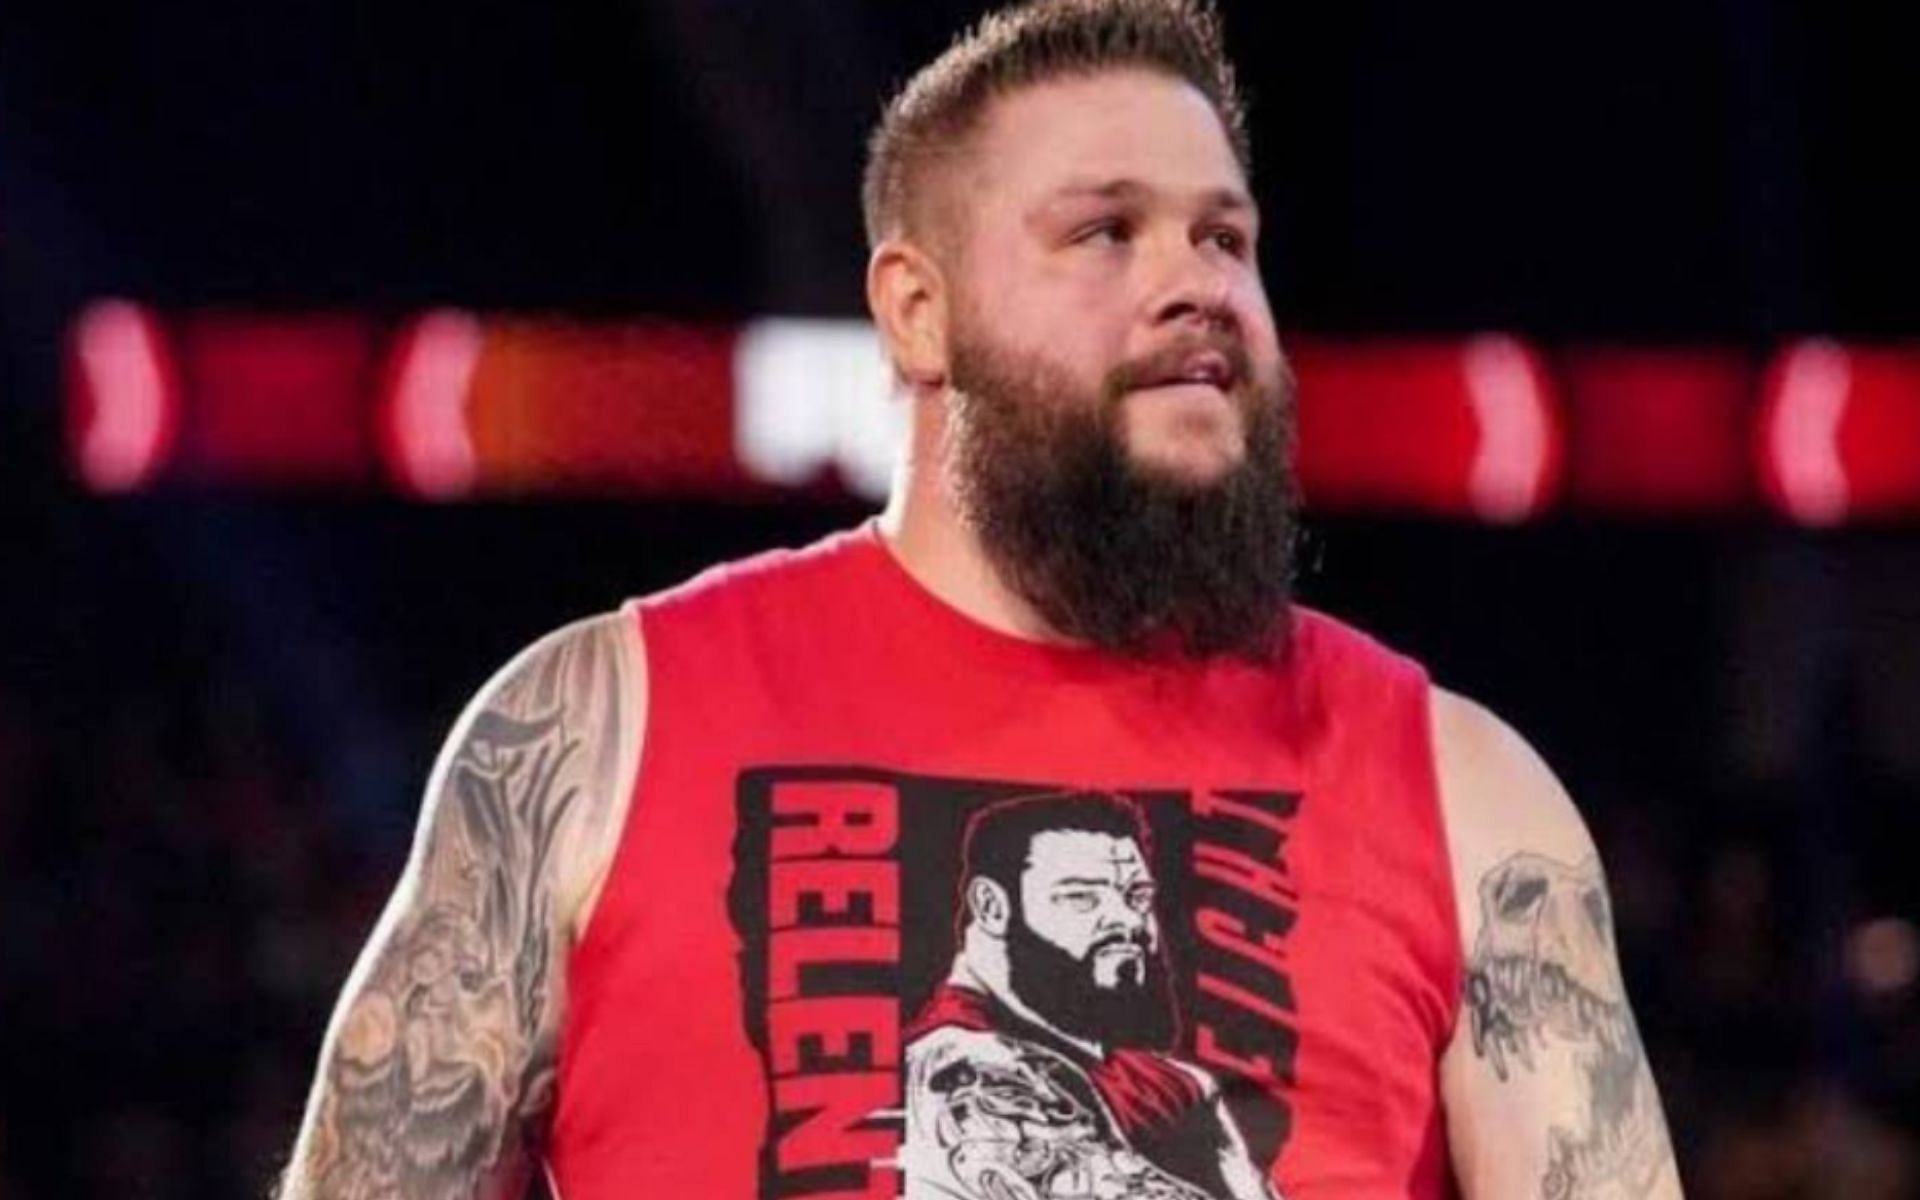 Kevin Owens has often paid his respects to WWE legends during his career